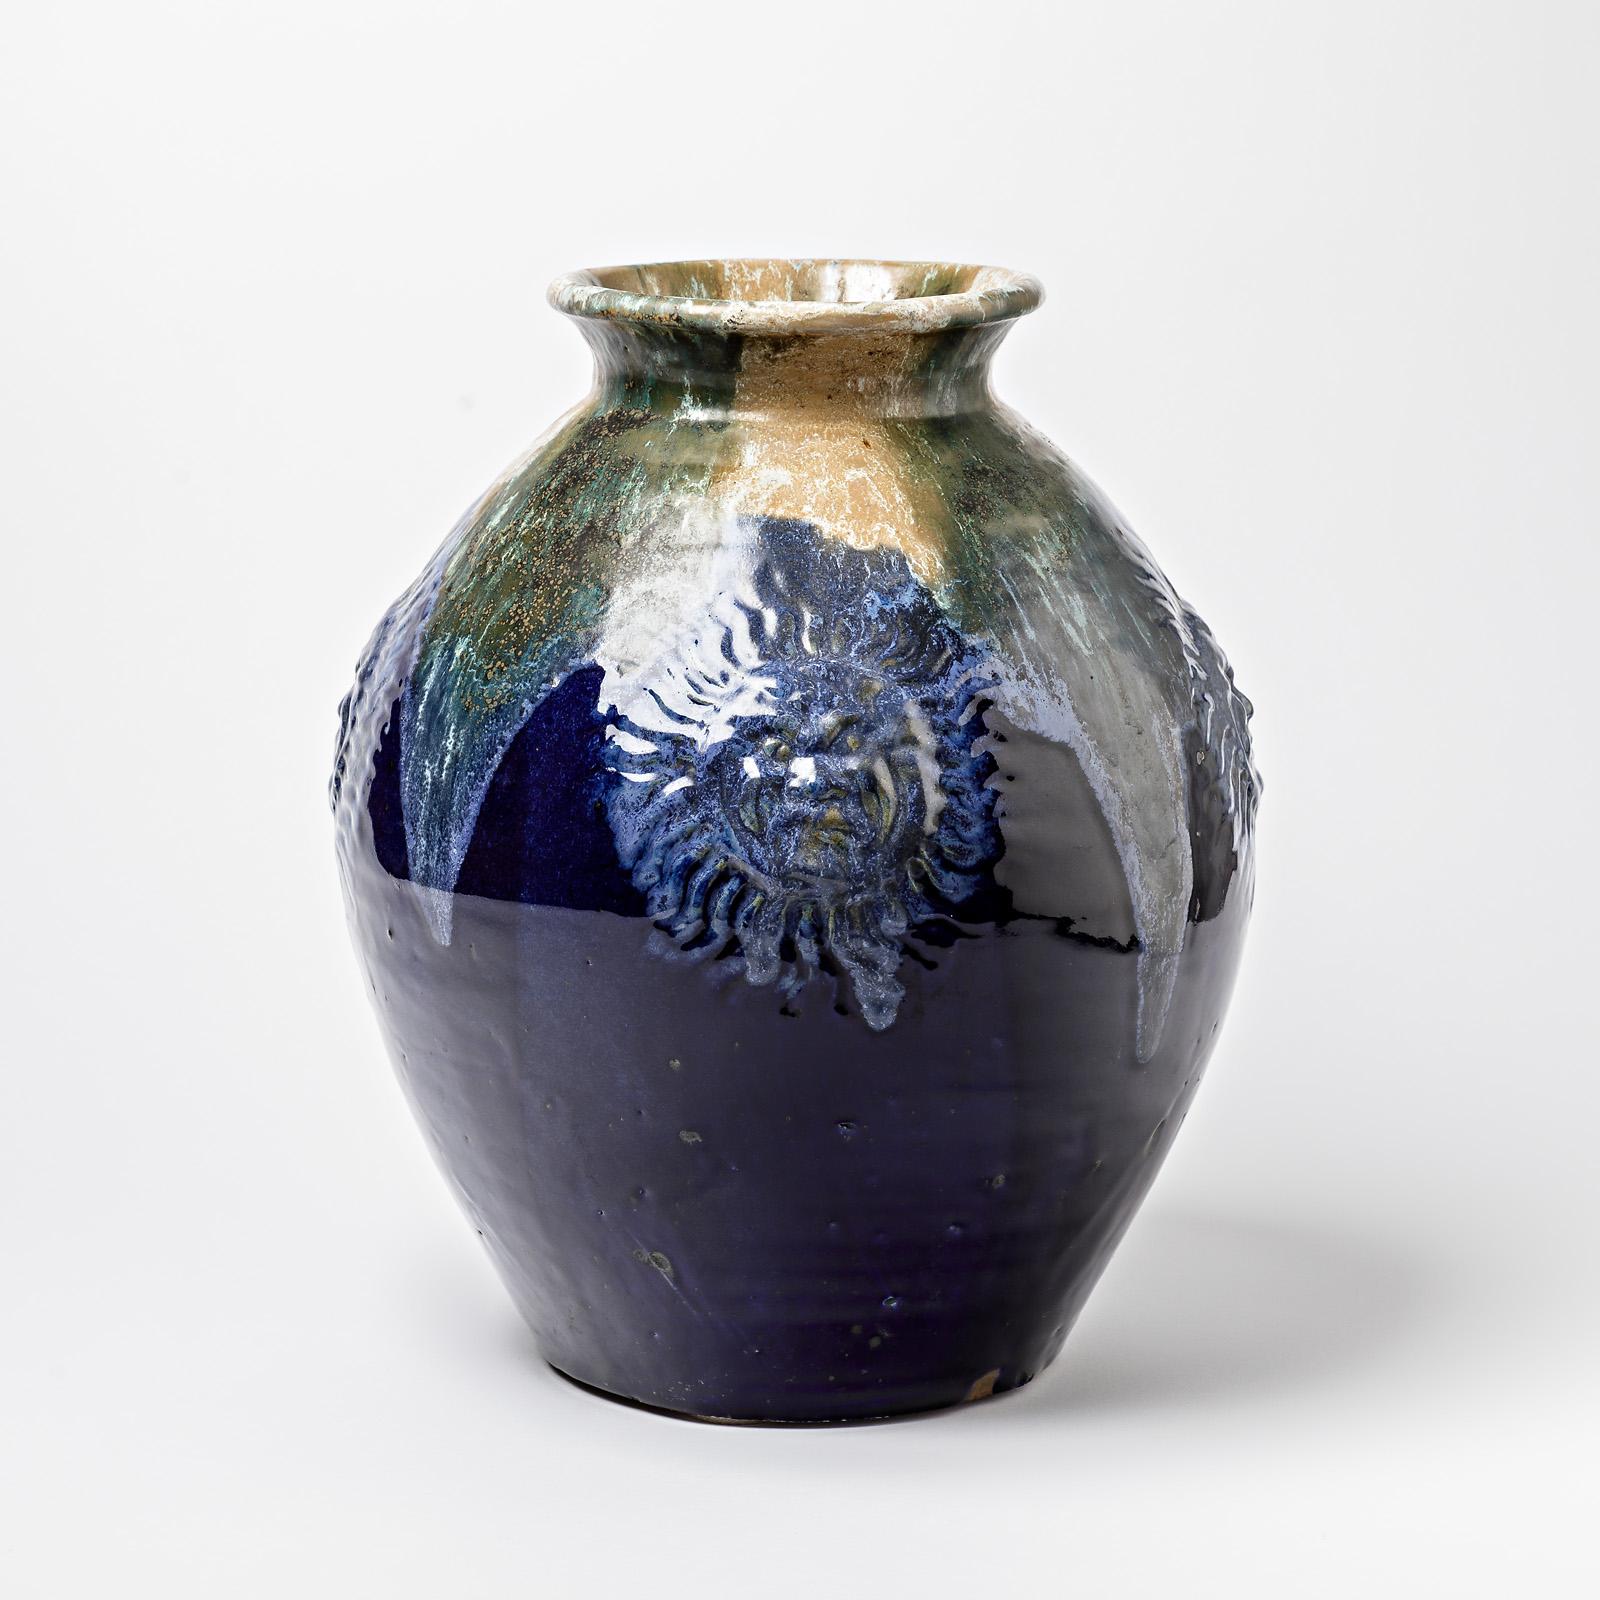 20th Century Big Ceramic Vase with Blue Glazes Decoration by Lucien Arnaud, circa 1920 For Sale